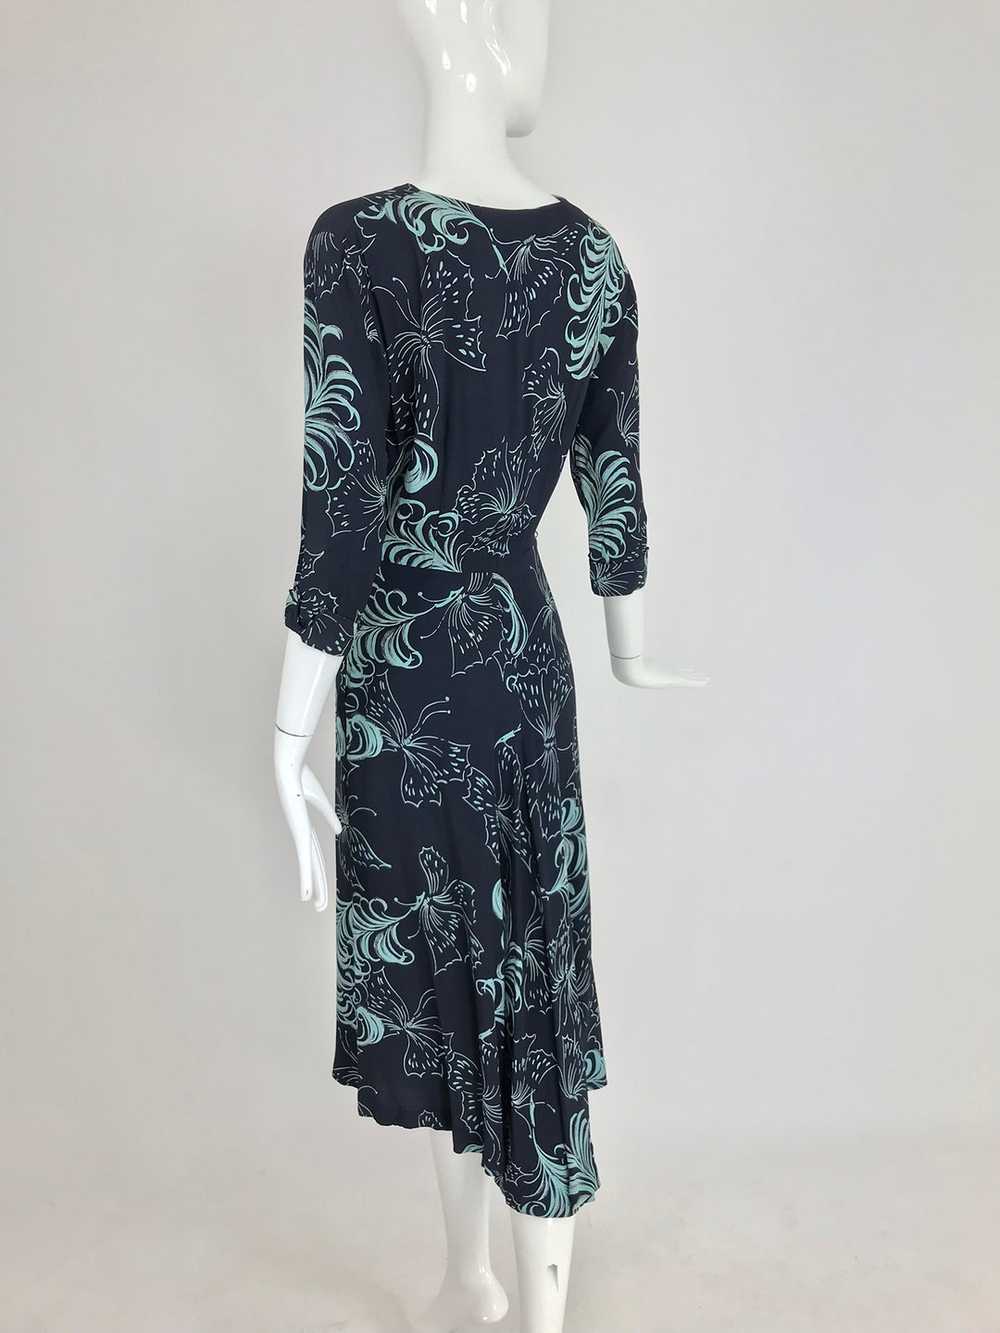 1940s Plume and Butterfly Rayon Print Day Dress - image 6